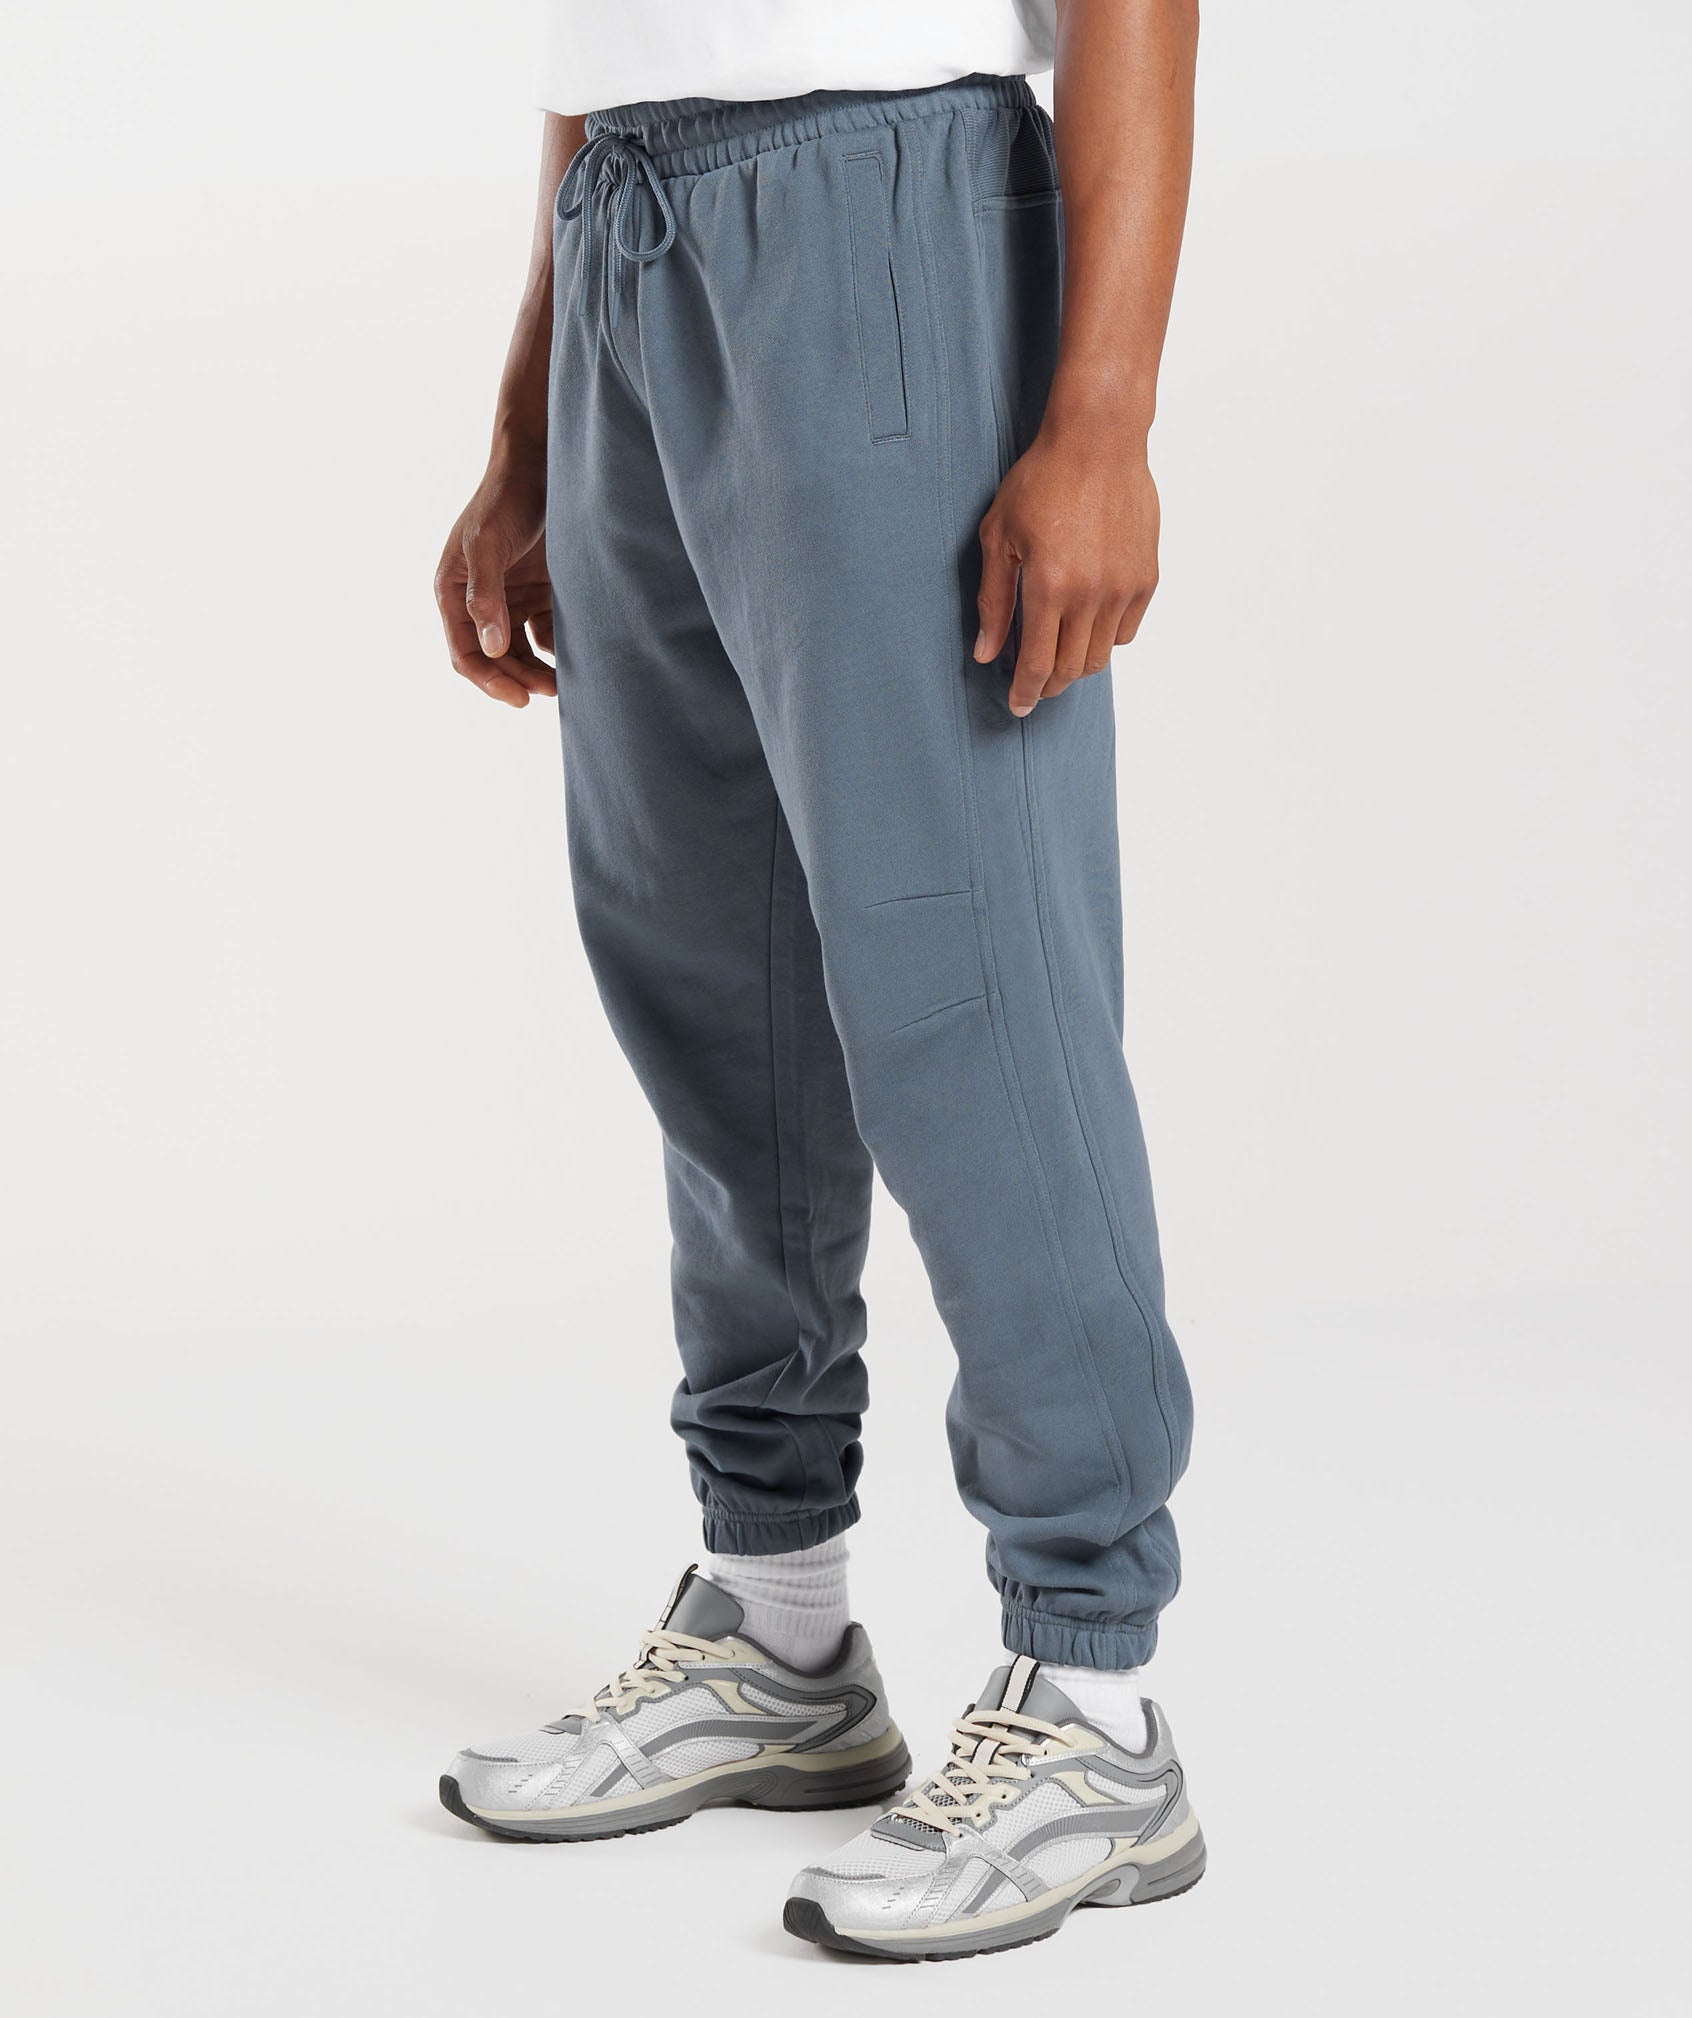 Rest Day Essentials Joggers in Evening Blue - view 2